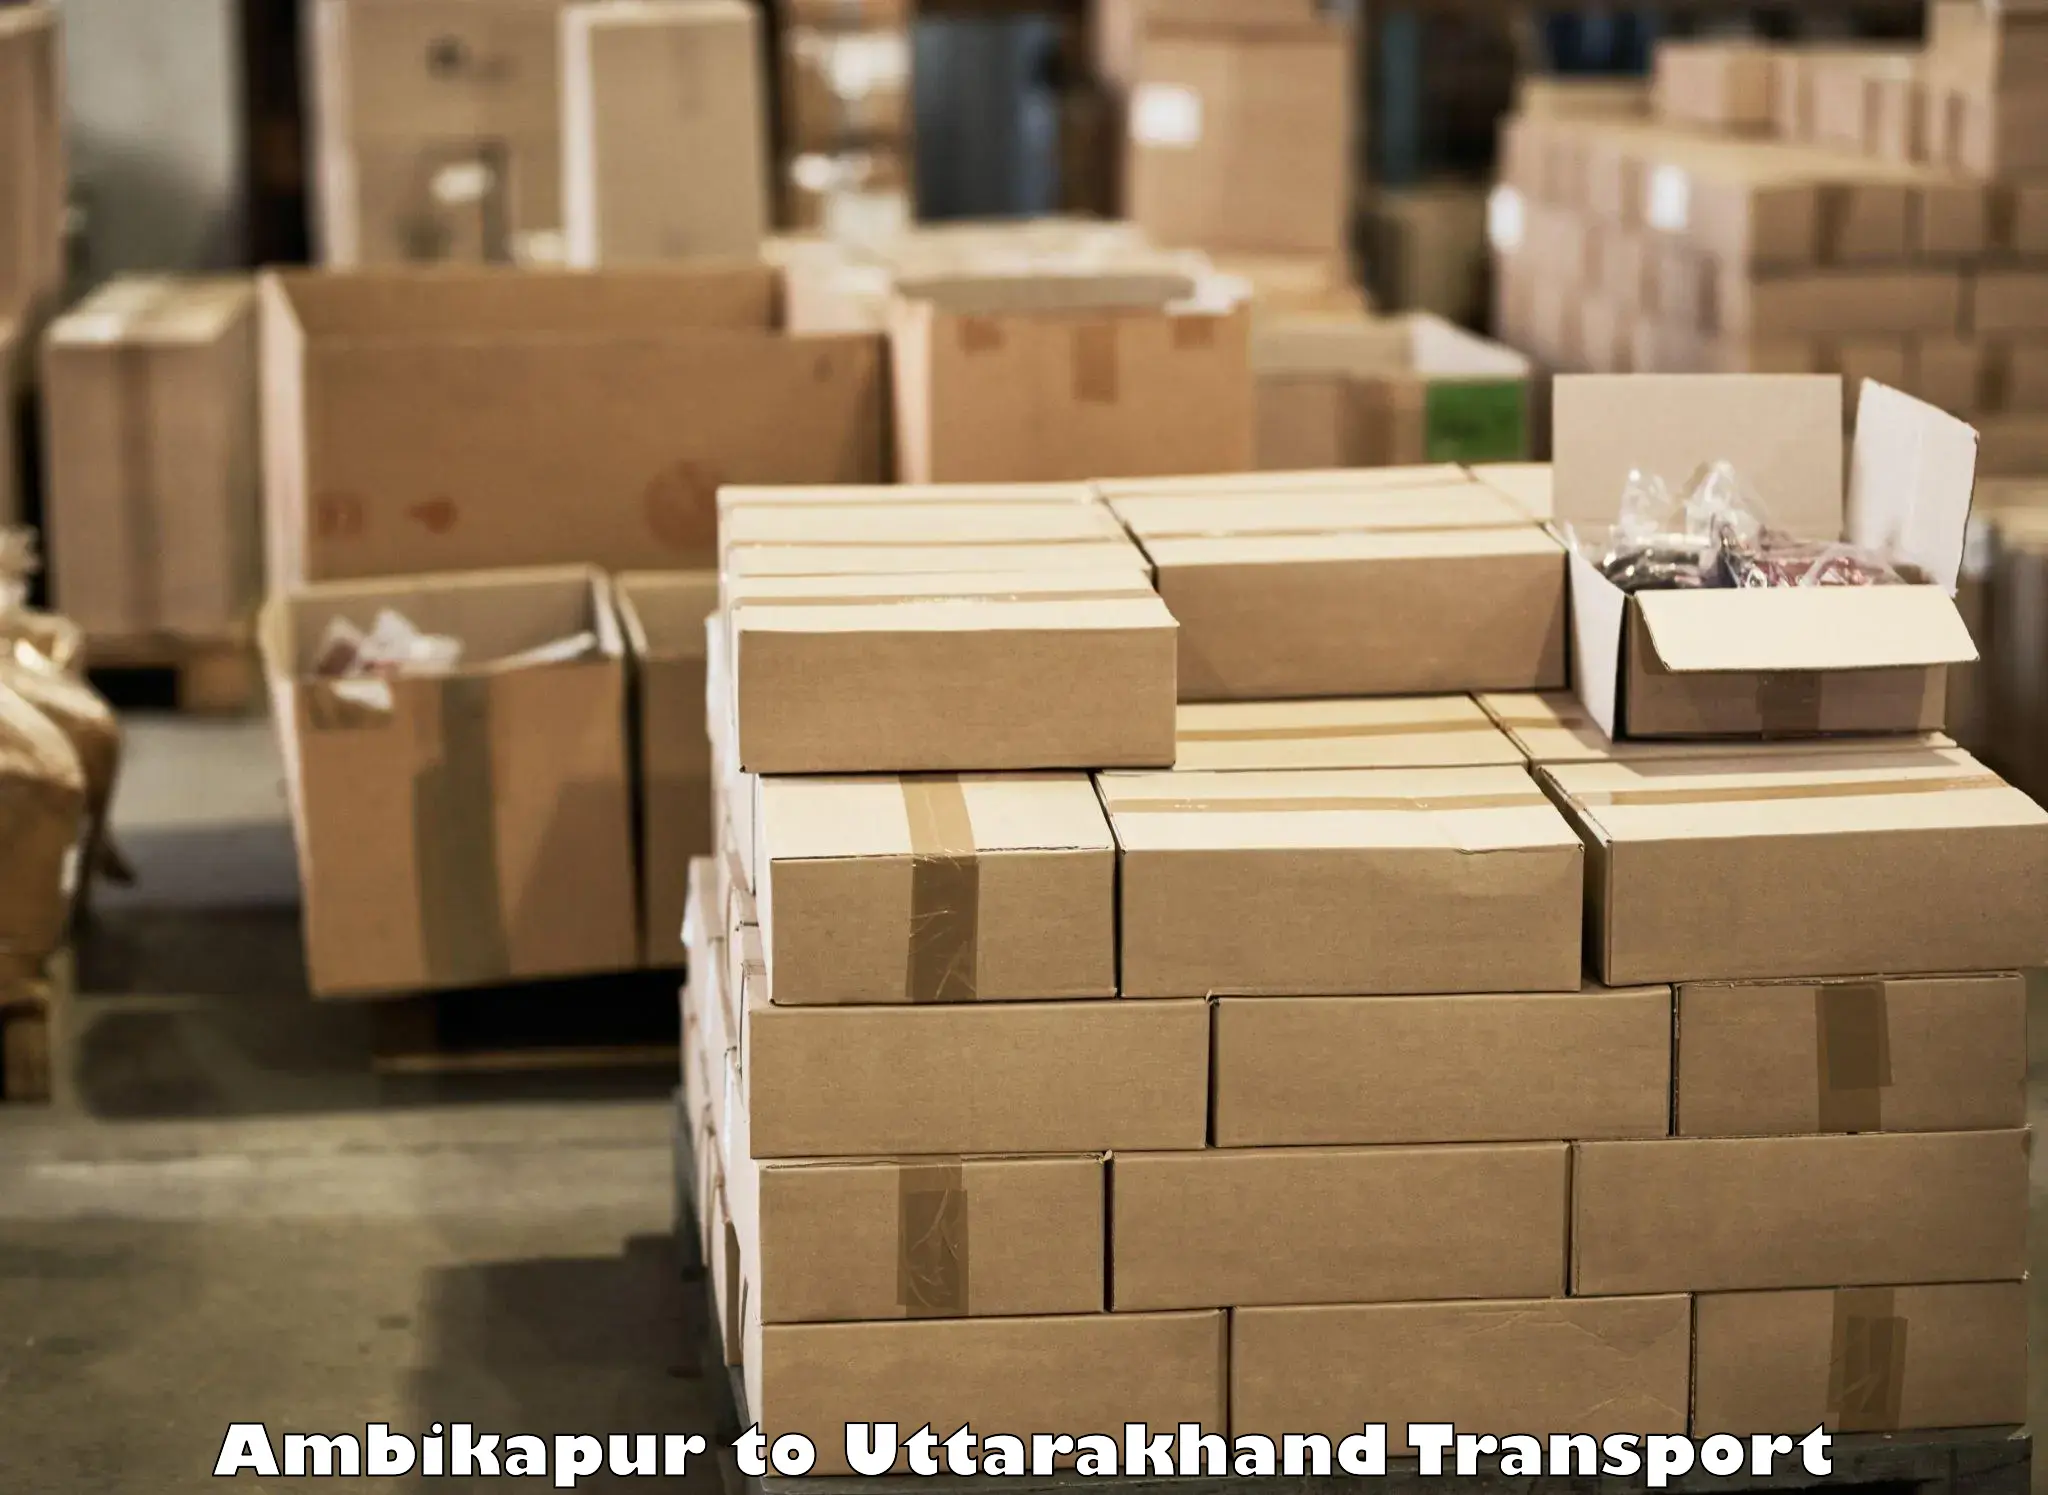 Commercial transport service Ambikapur to Nainital